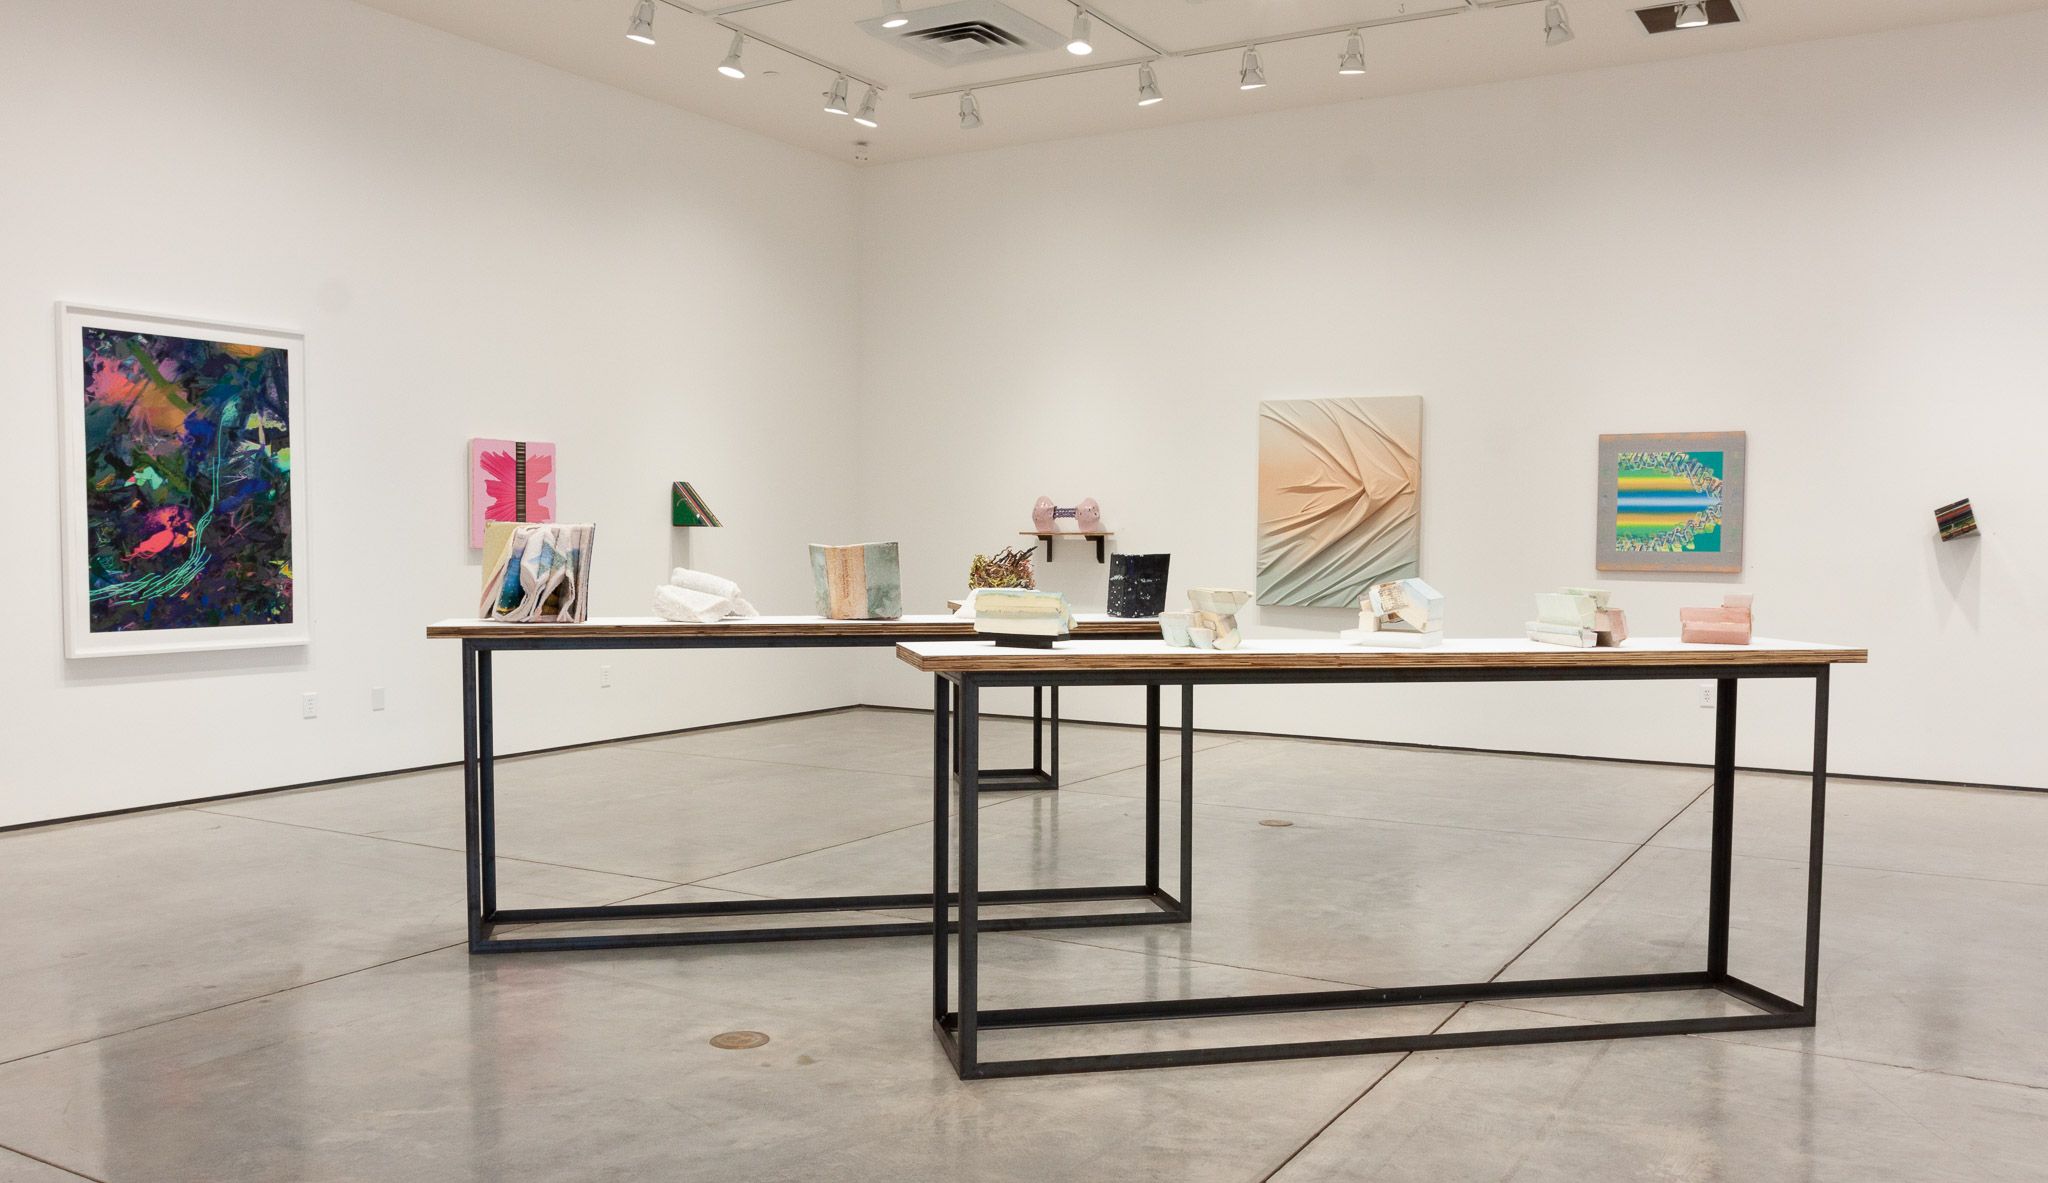 Image of Certain Matter exhibition